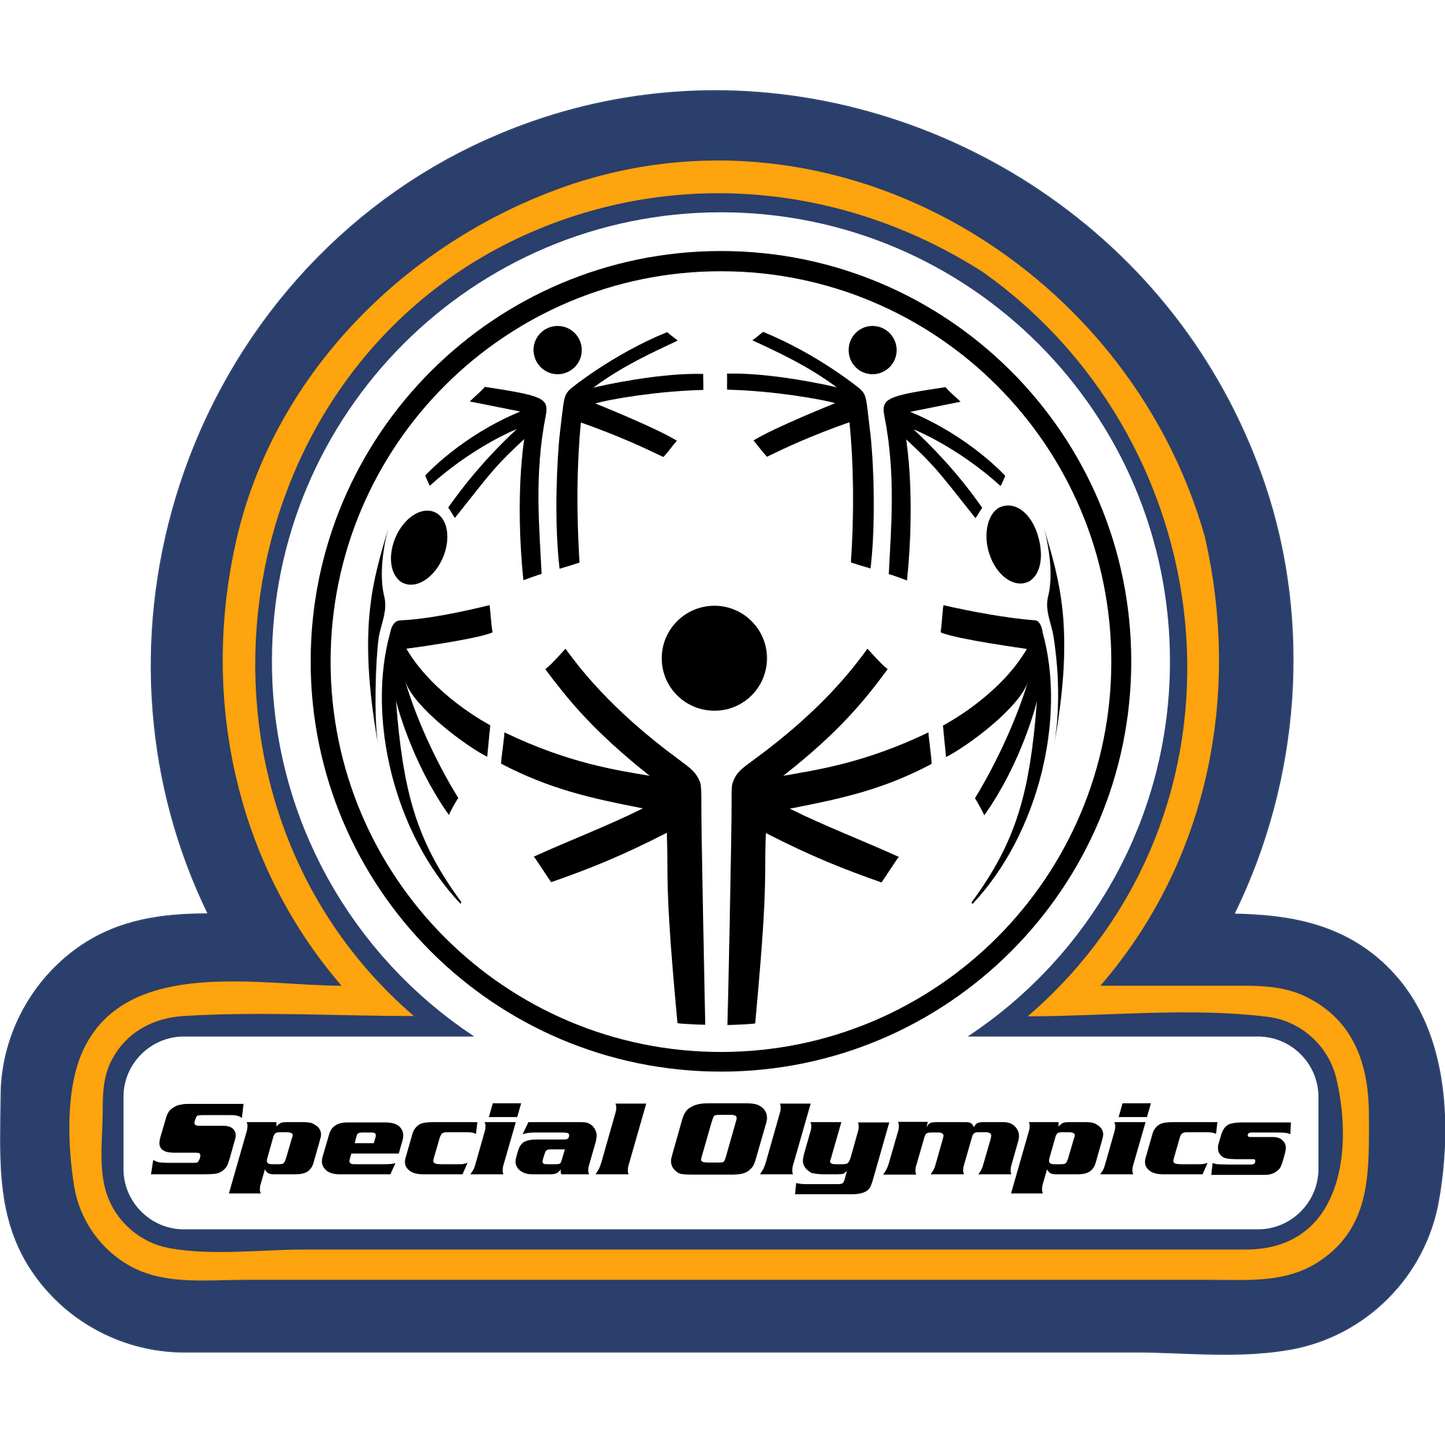 Special Olympics Sleeve Patch